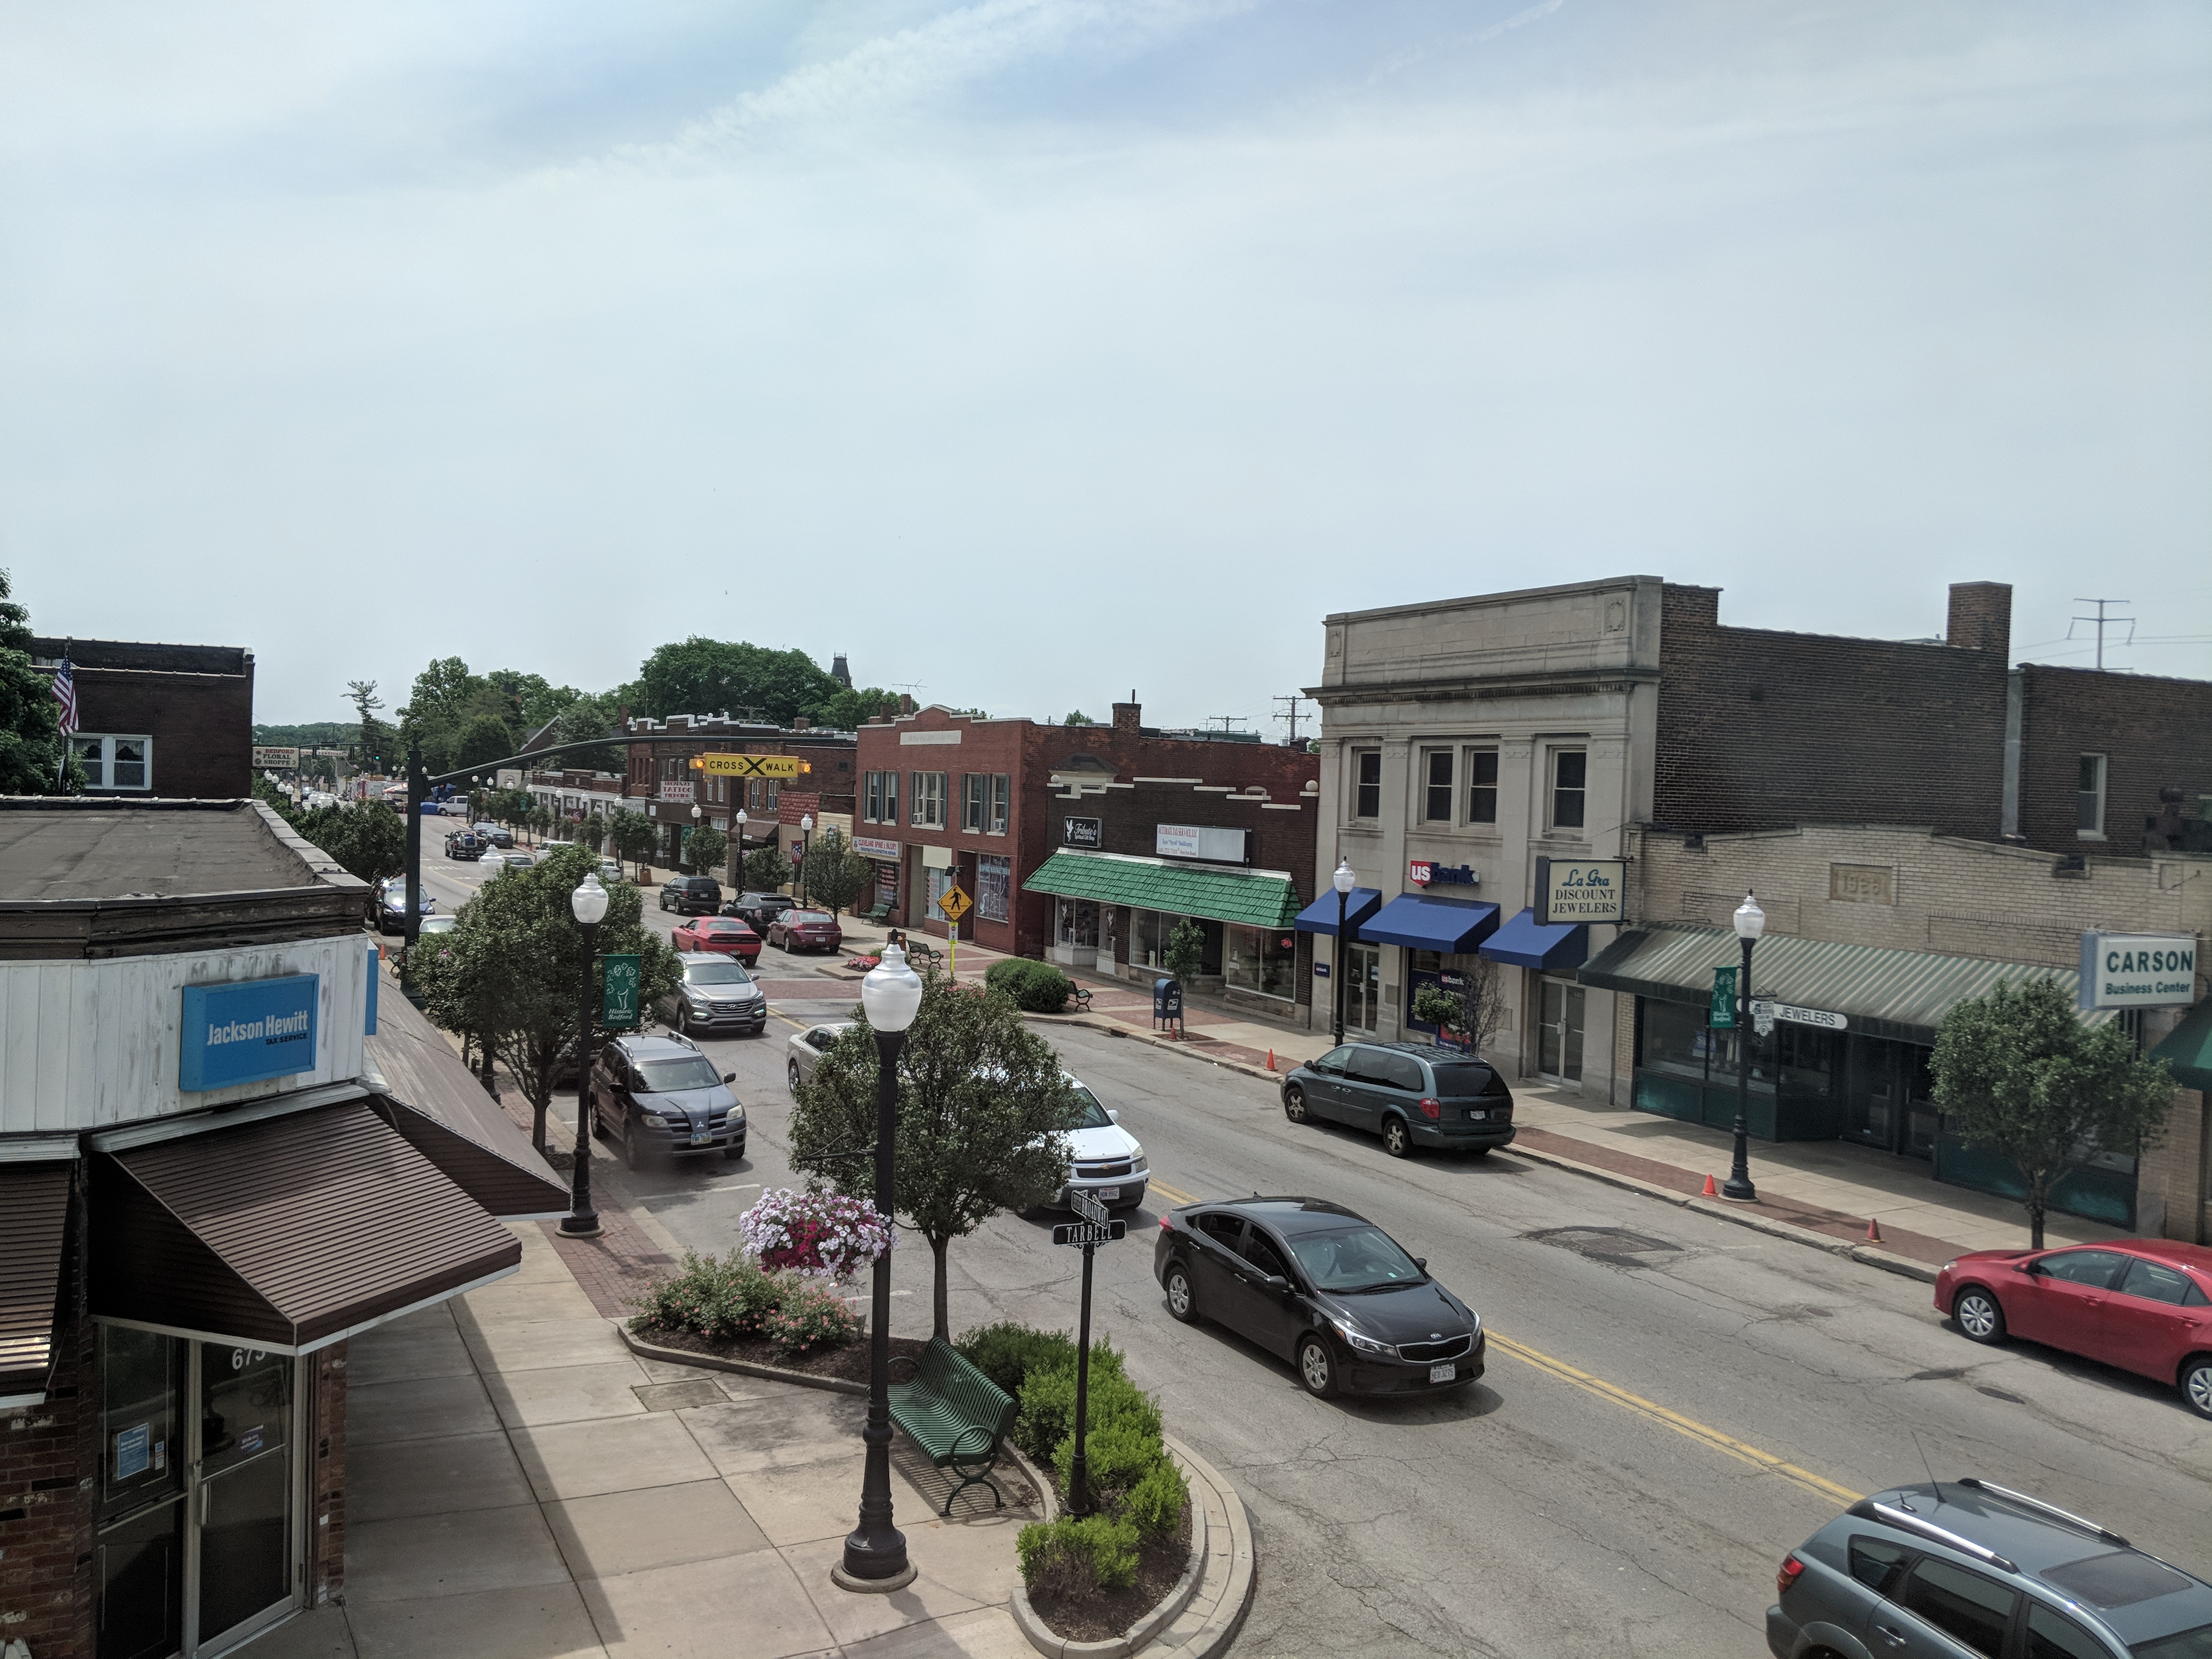 Take a Survey About The Connectivity Plan: Help Make Bedford Downtown Better